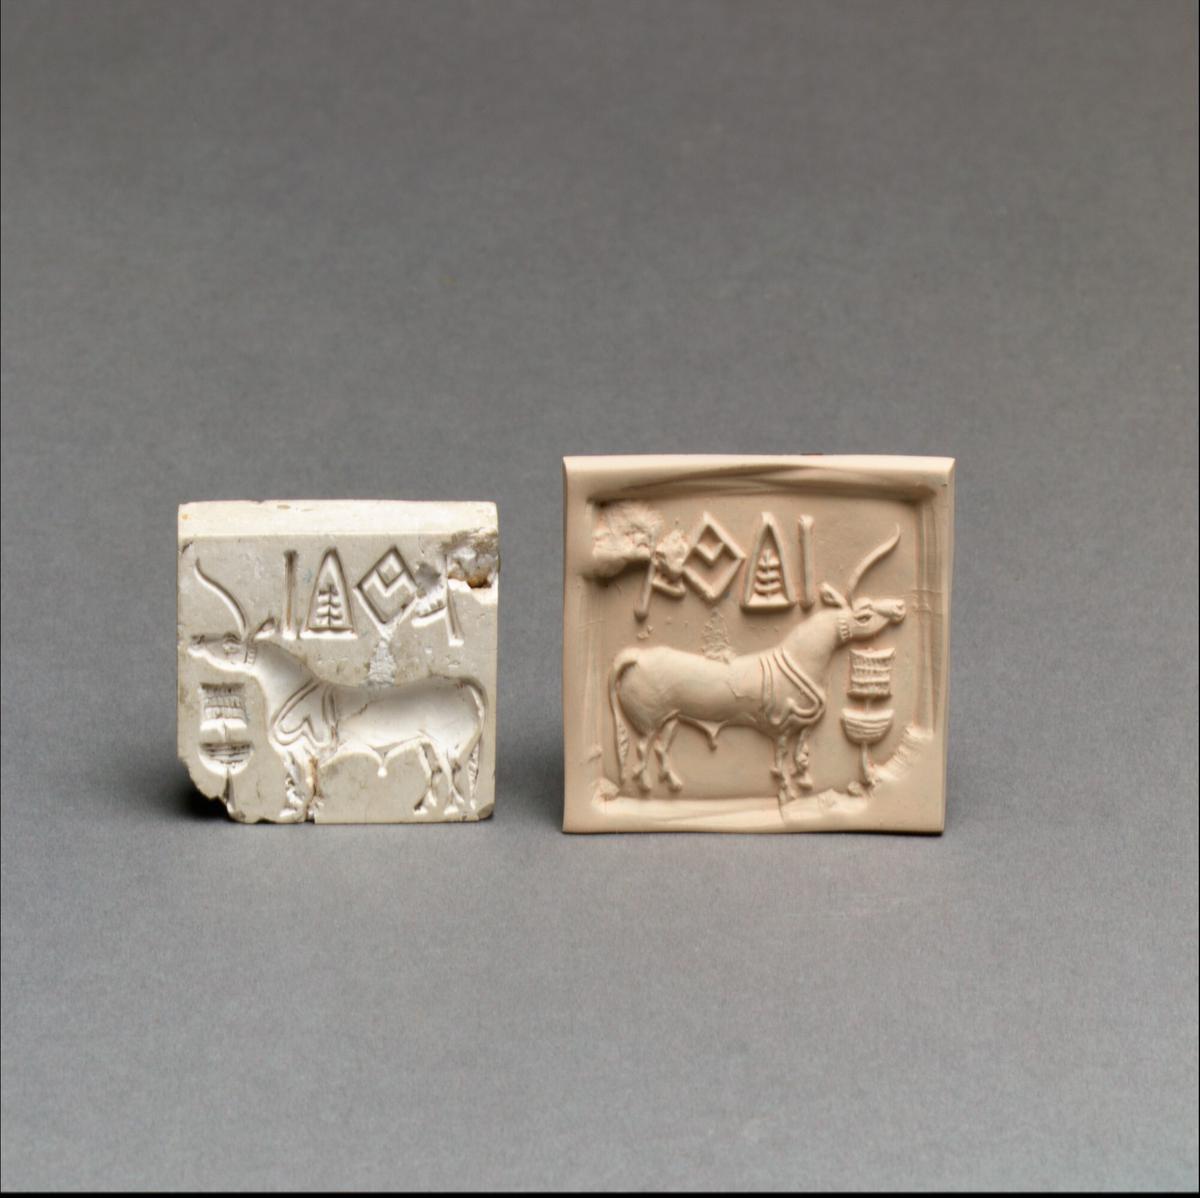 Stamp seal and impression, content from MAP Academy’s Encyclopedia of Art 